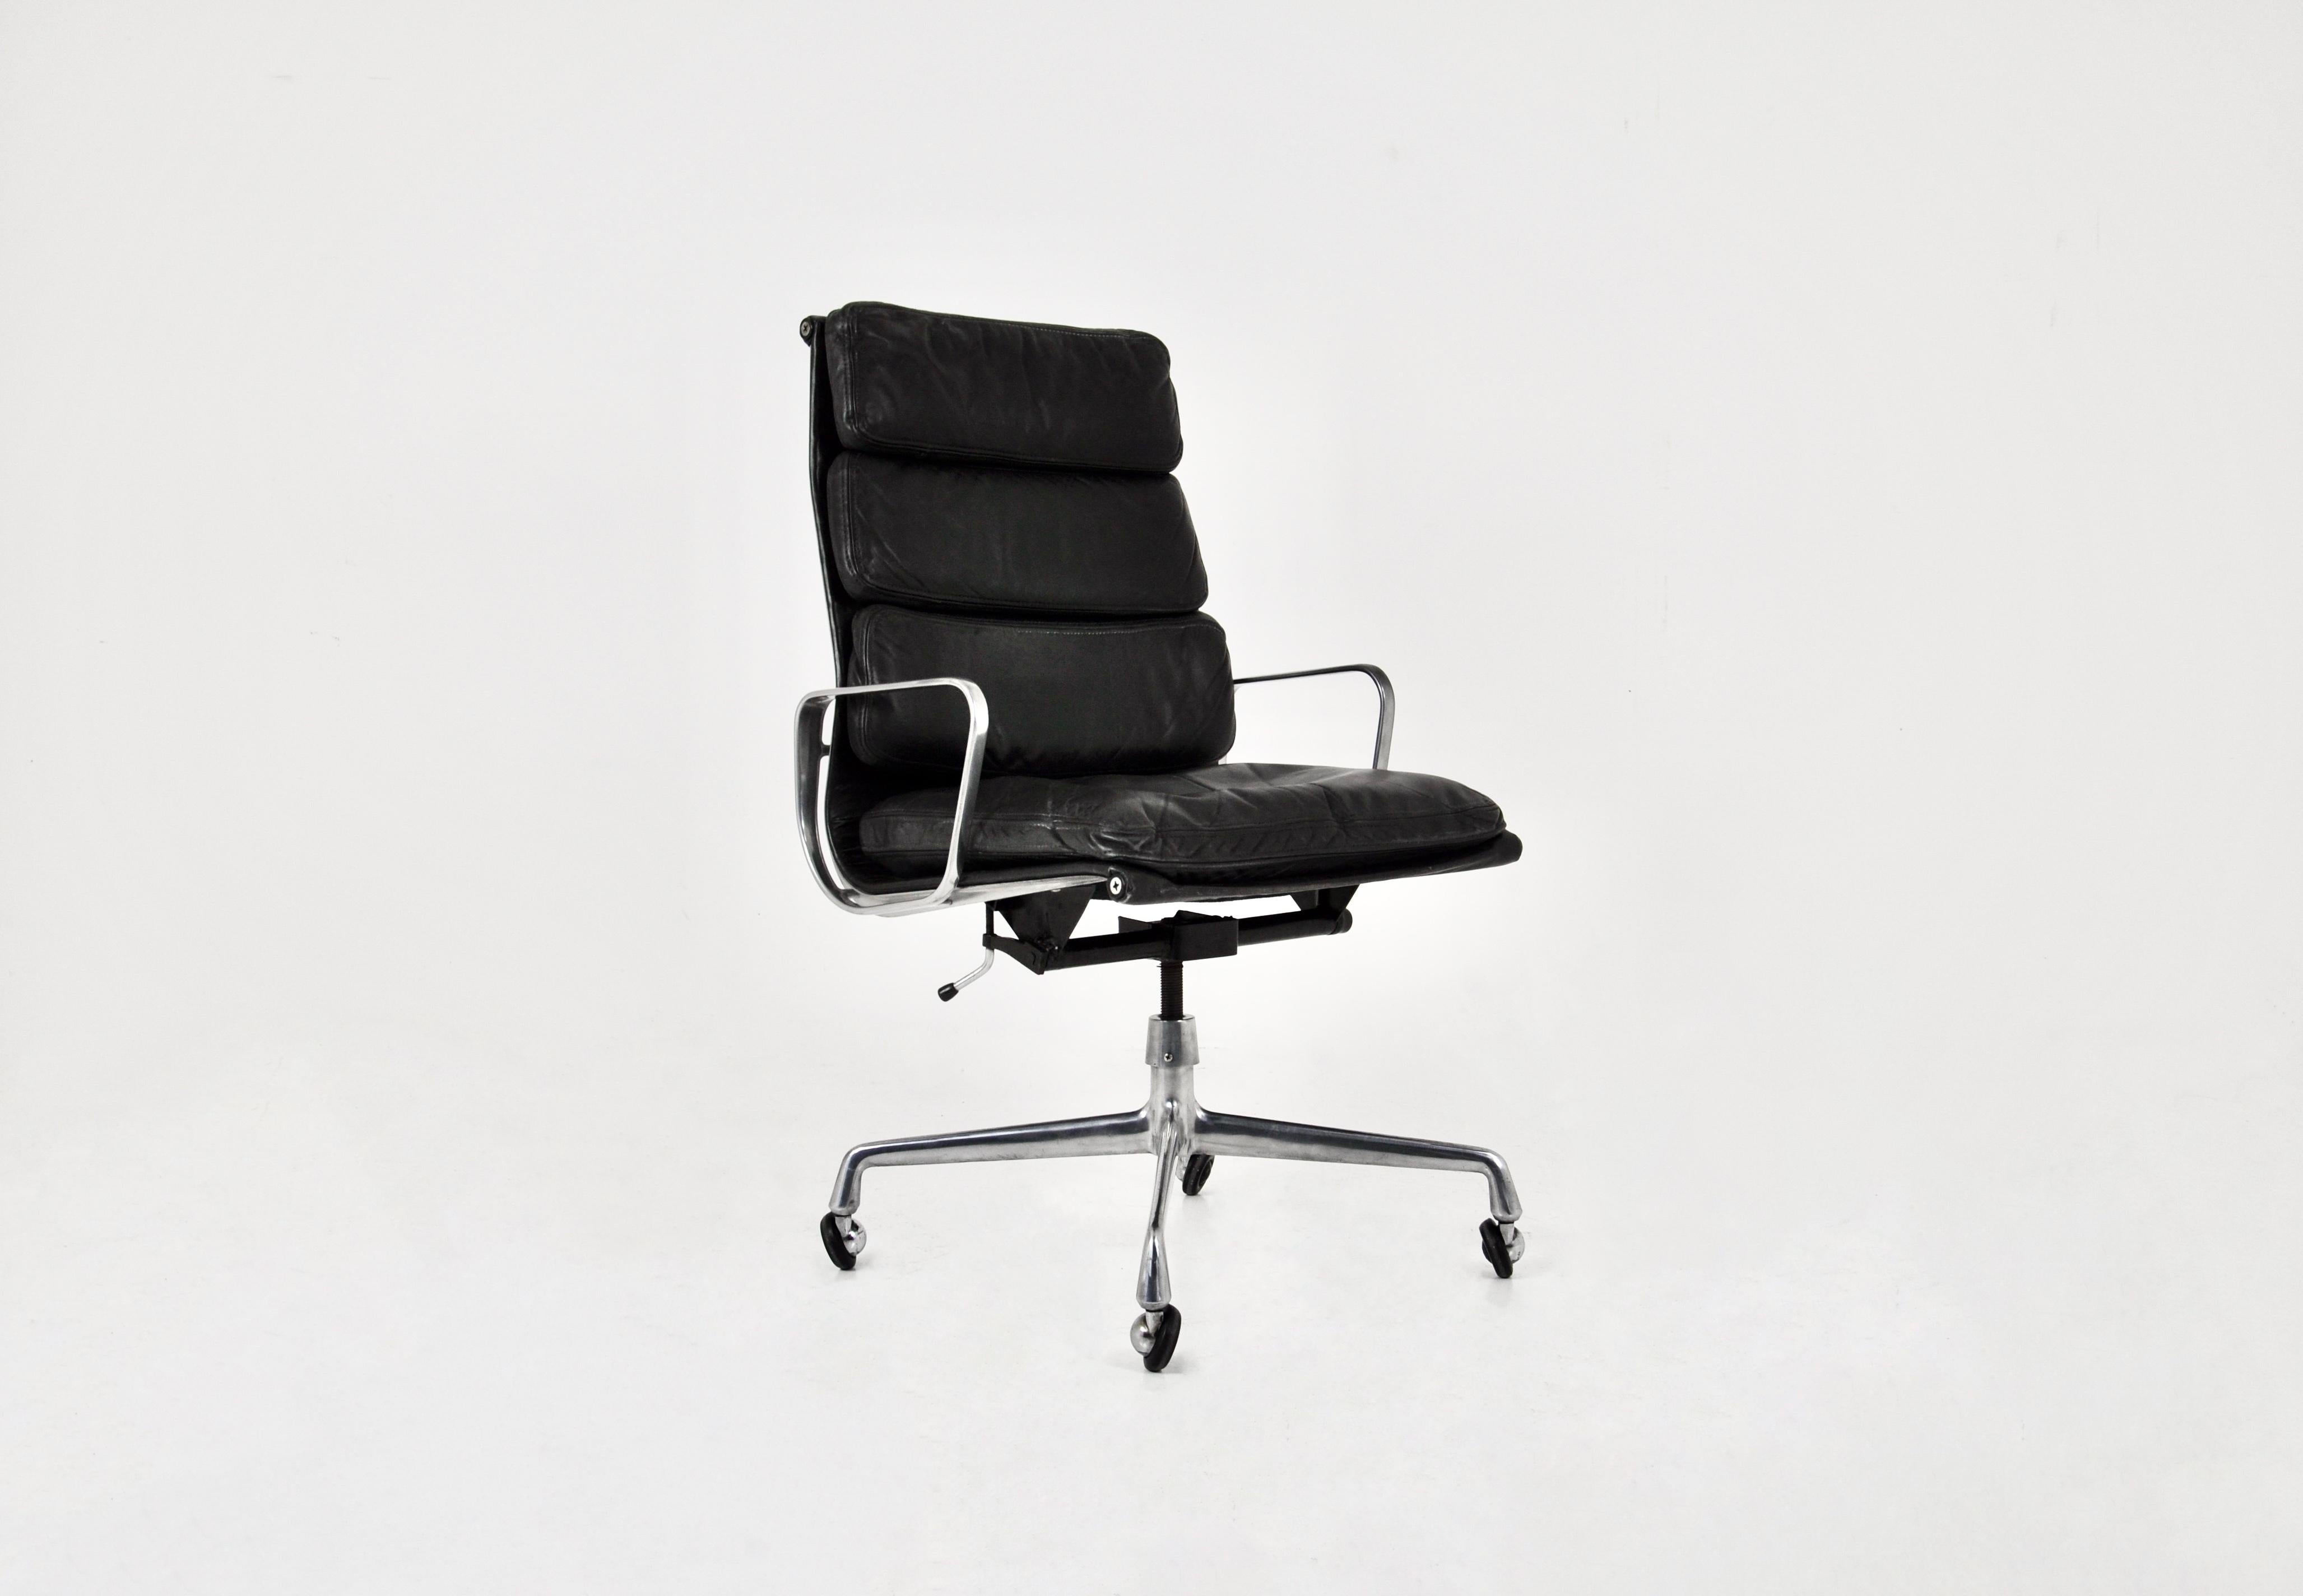 Leather chair with aluminum base and wheels. Stamped Herman Miller under the seat. The chair turns on itself and reclines. Seat height: 53 cm. Wear due to time and age. 